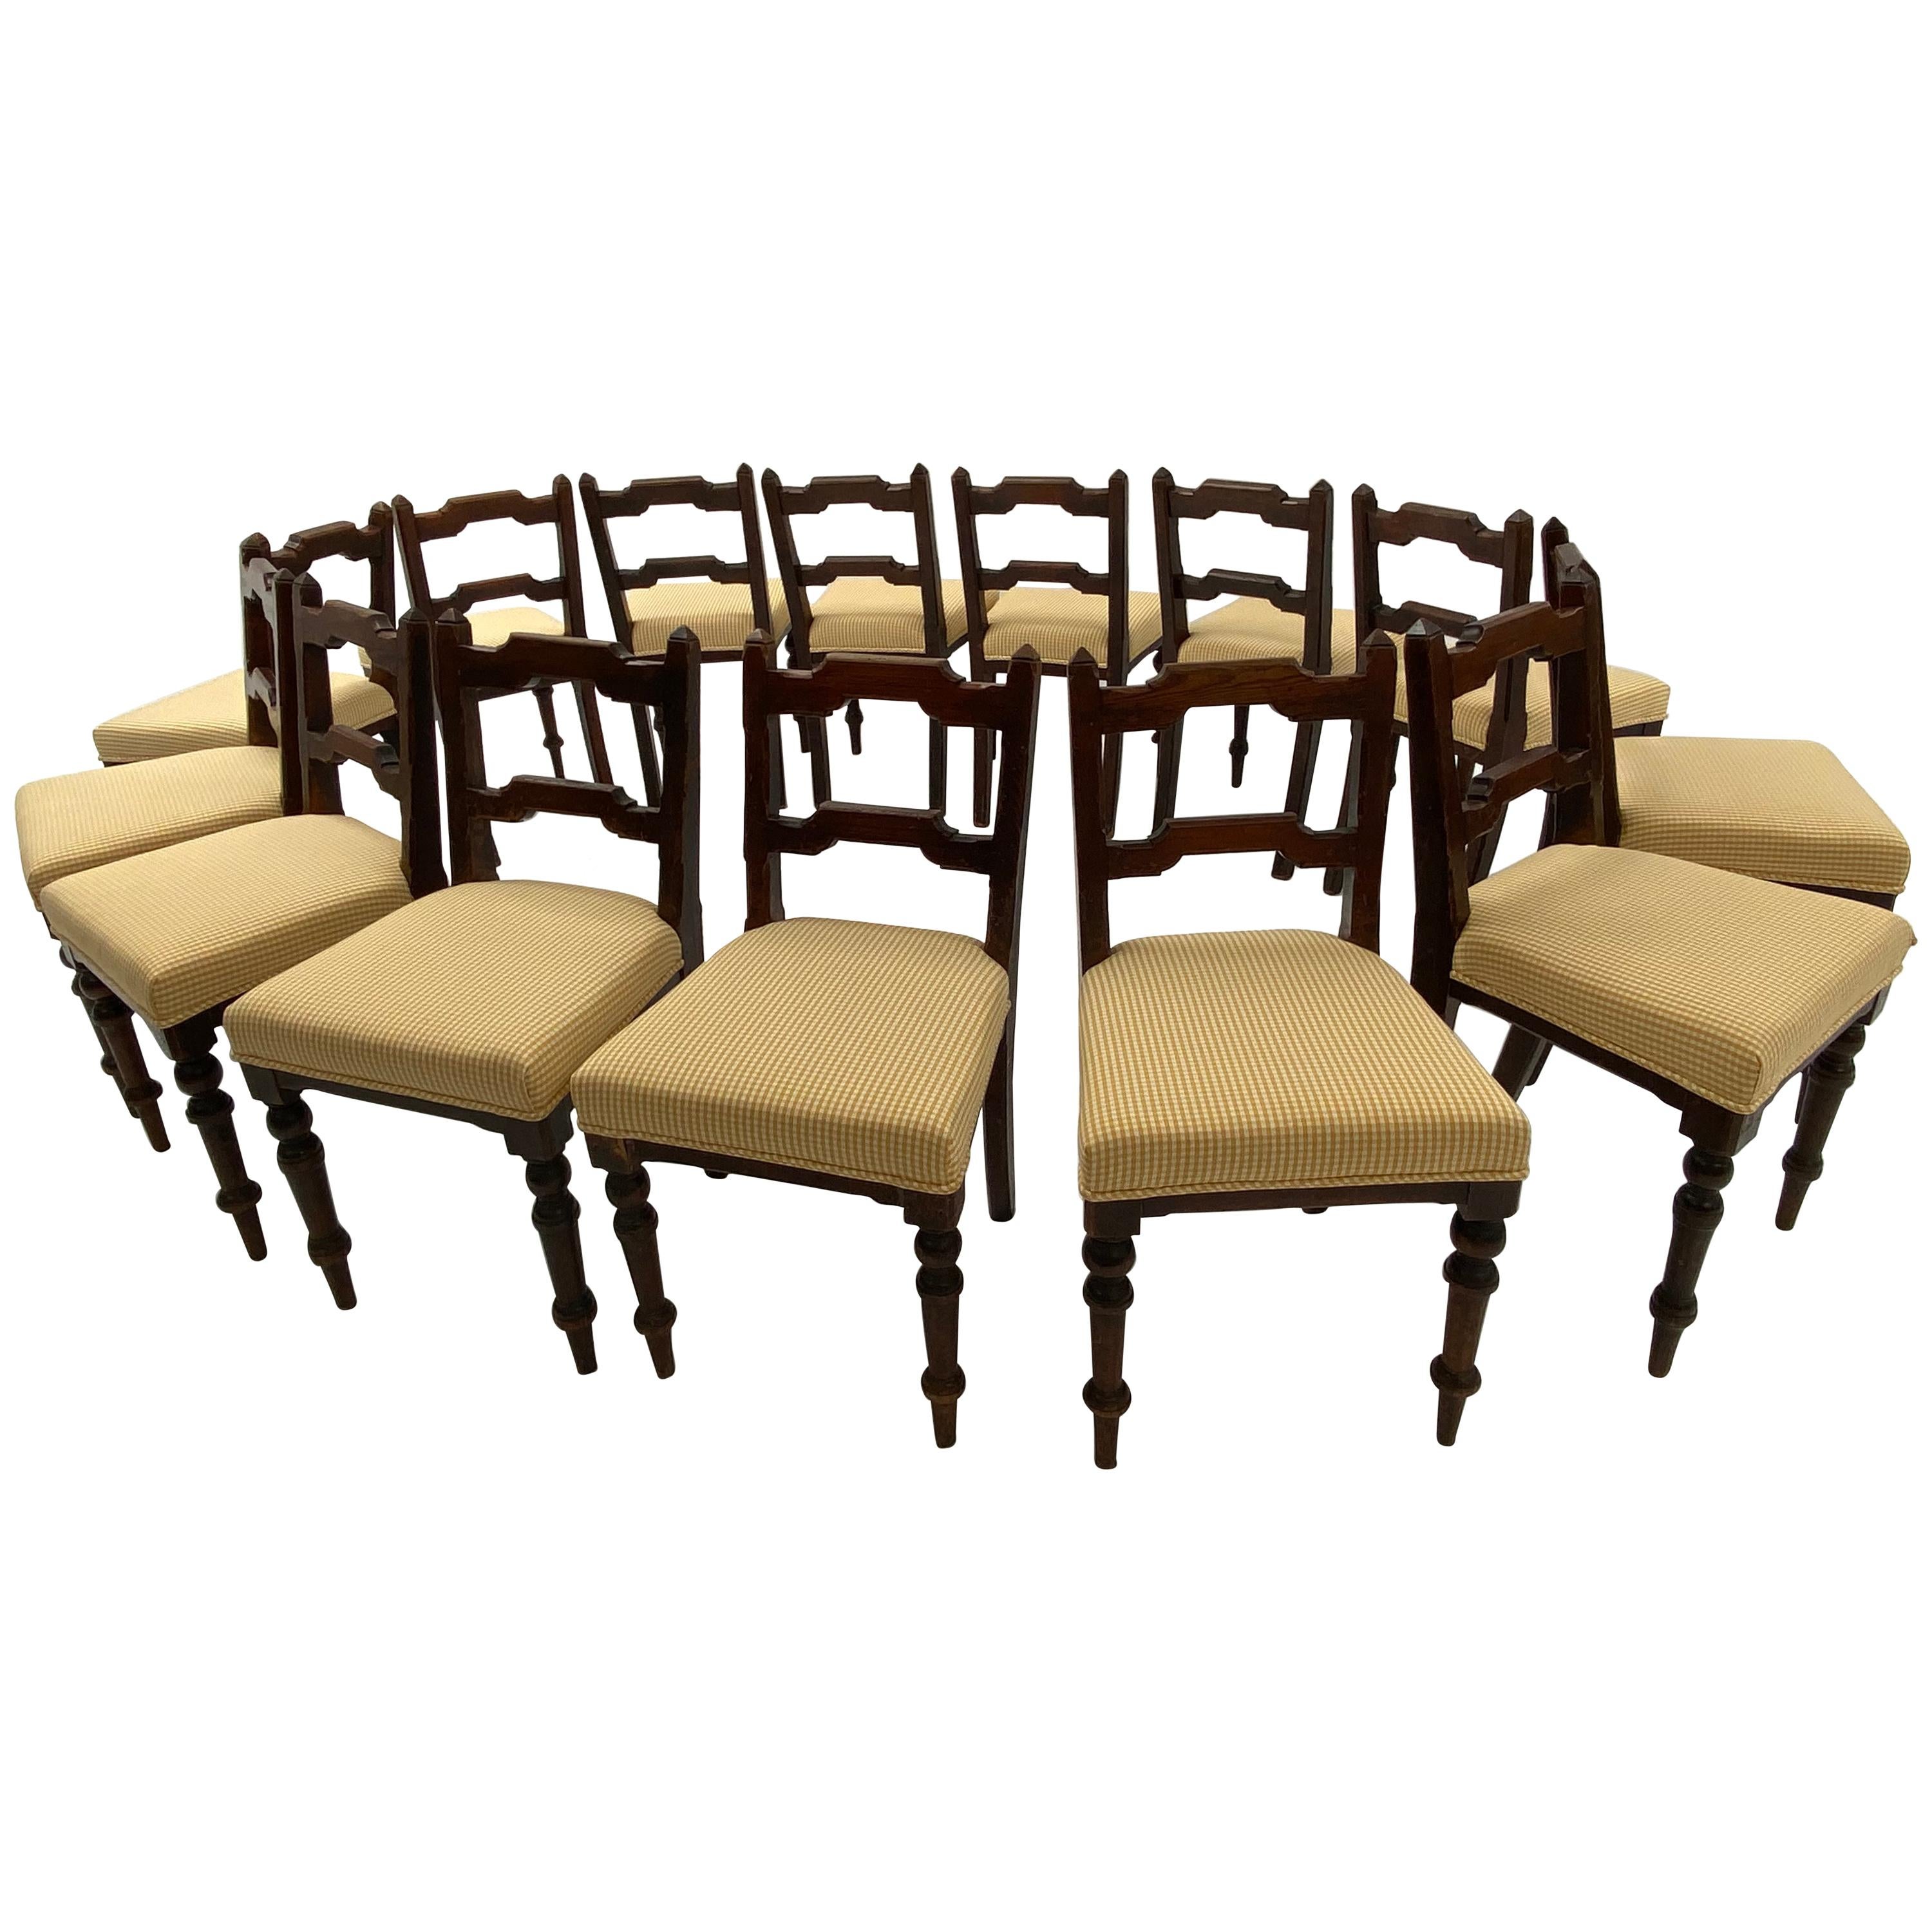 Rare Set of 14 Rustic Chairs in Pine with New Upholstery, Ireland